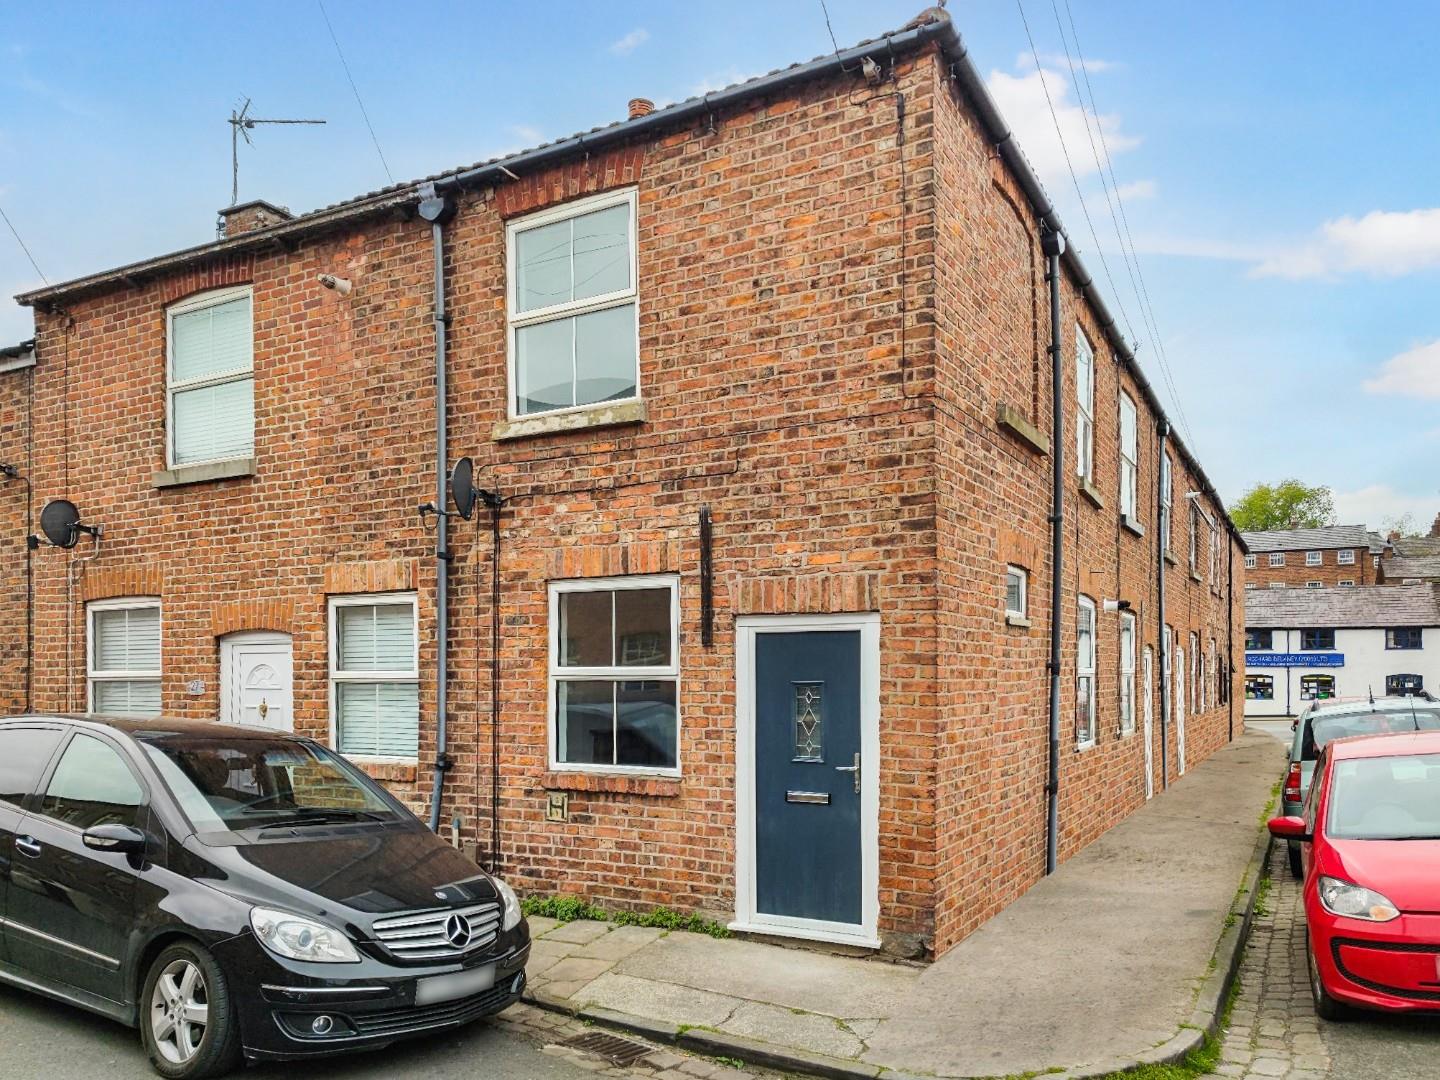 2 bed terraced house to rent in Pool Street, Macclesfield - Property Image 1